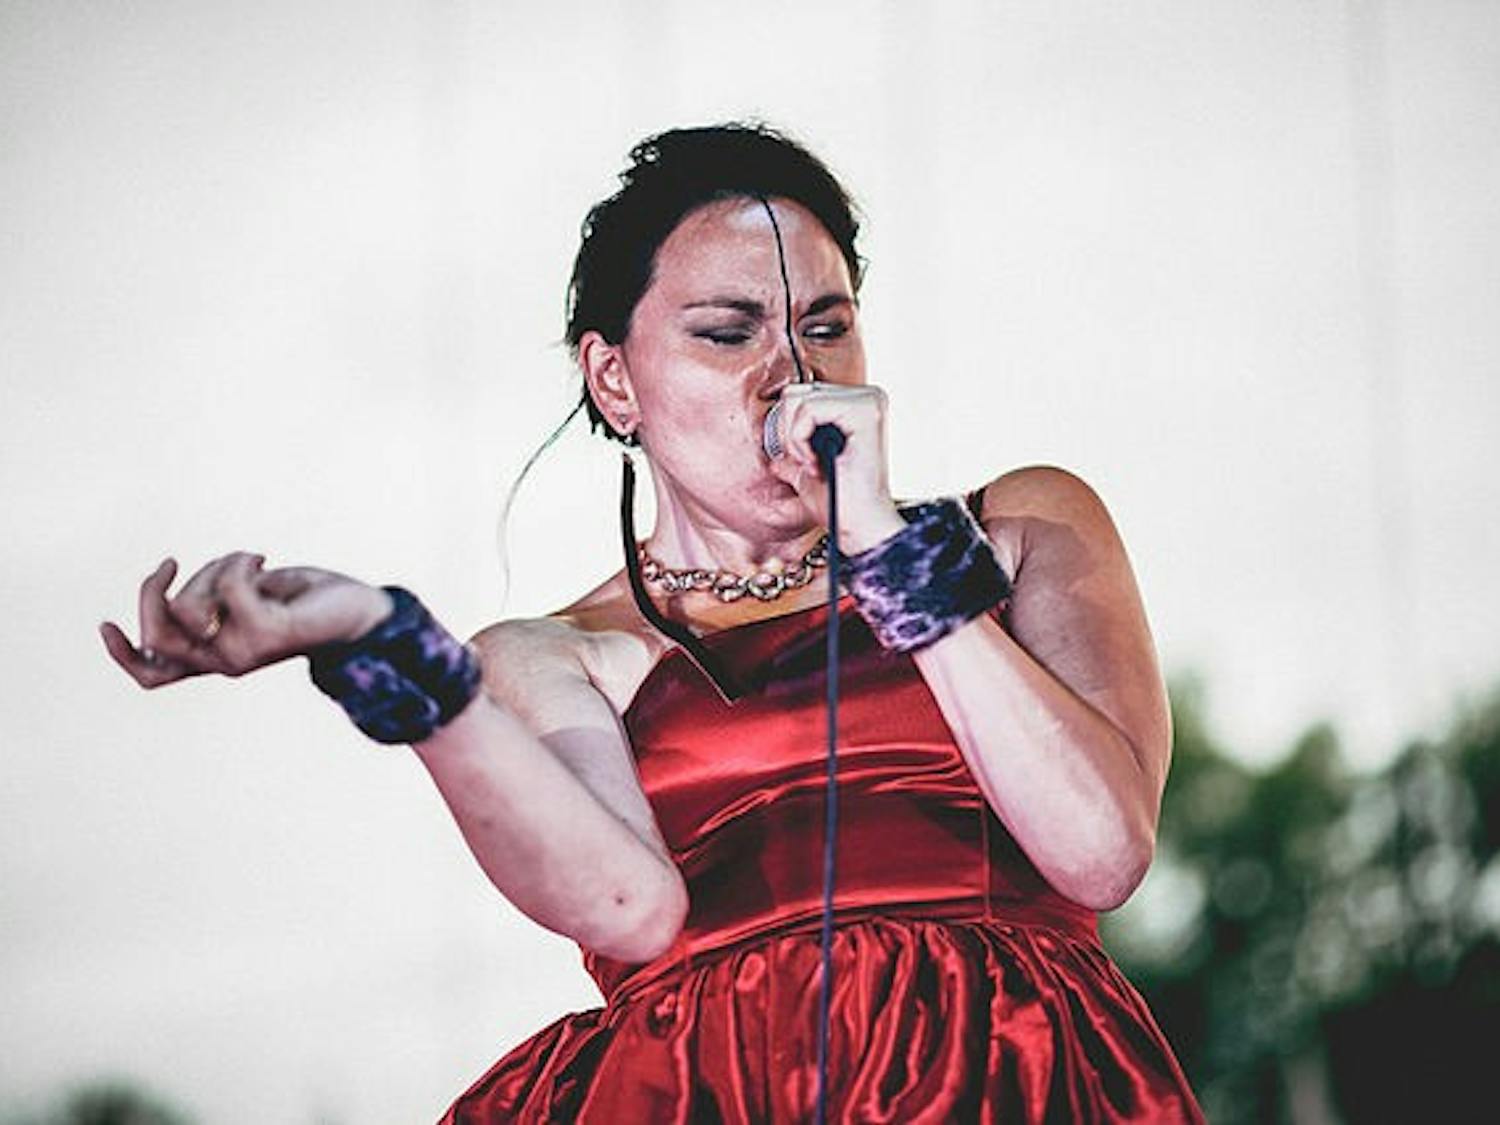 Tanya Tagaq incorporates a variety of vocal noises inspired by Inuit vocal practices.